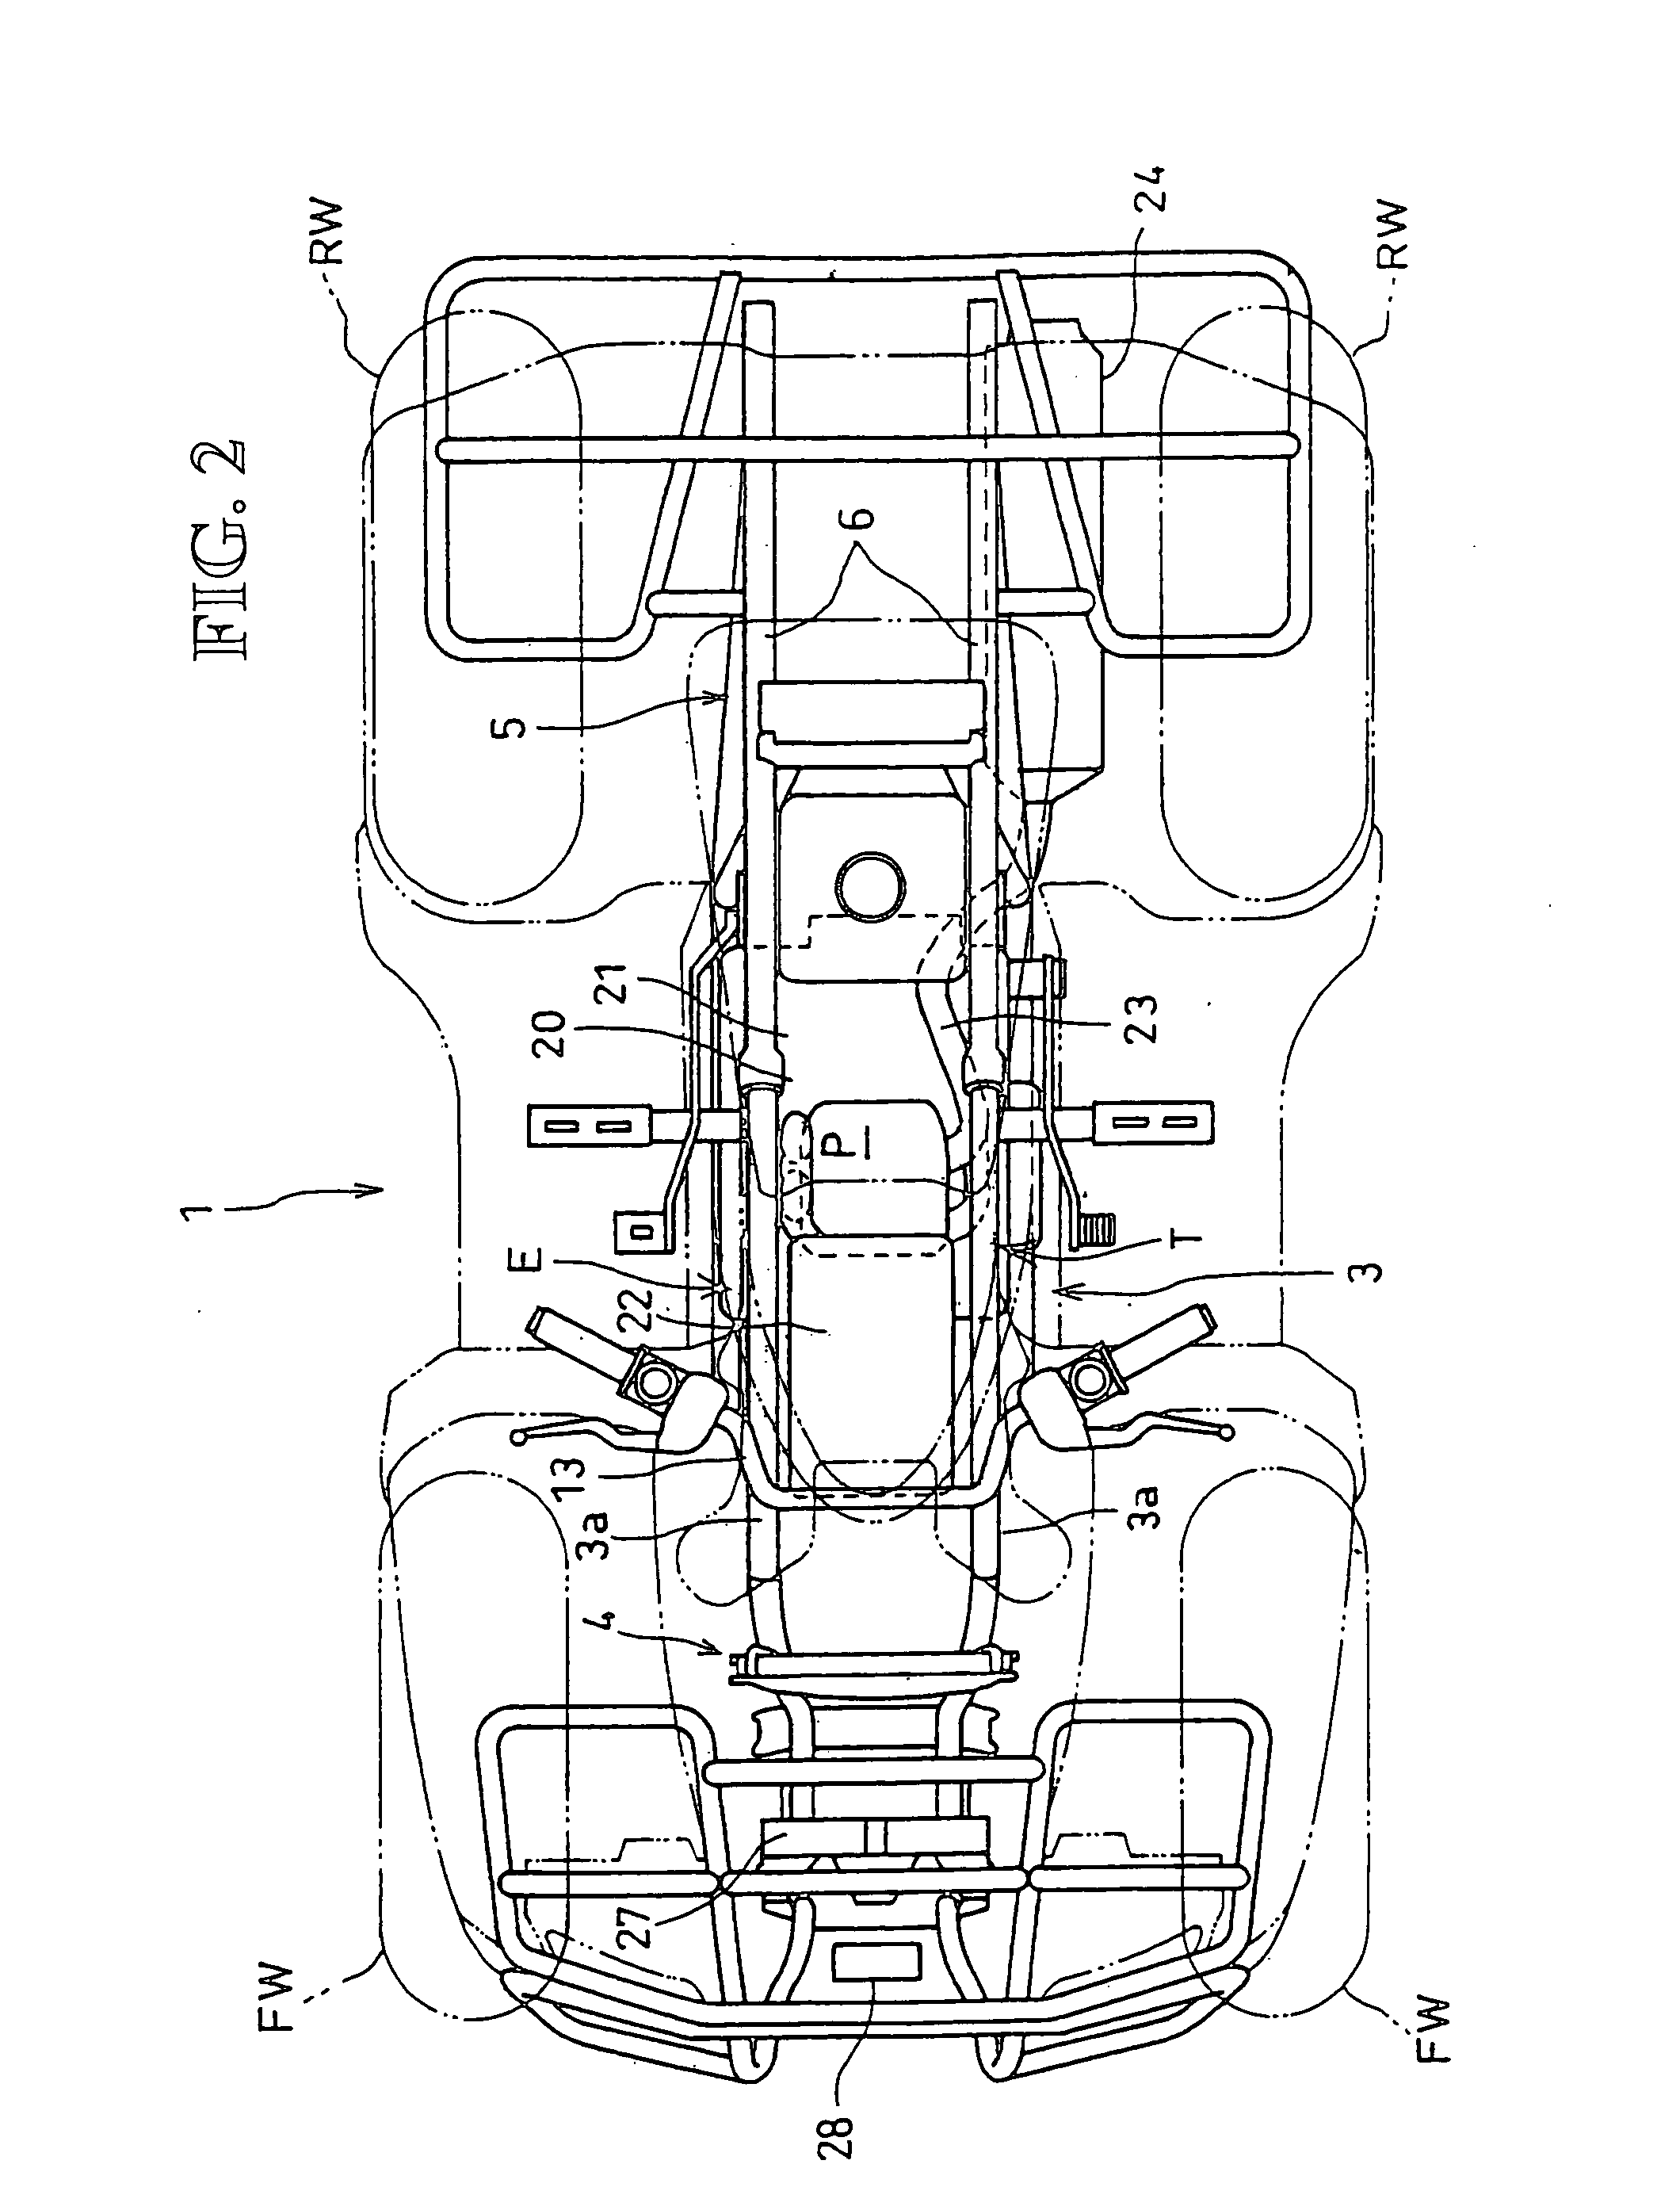 Crankcase structure of internal combustion engine